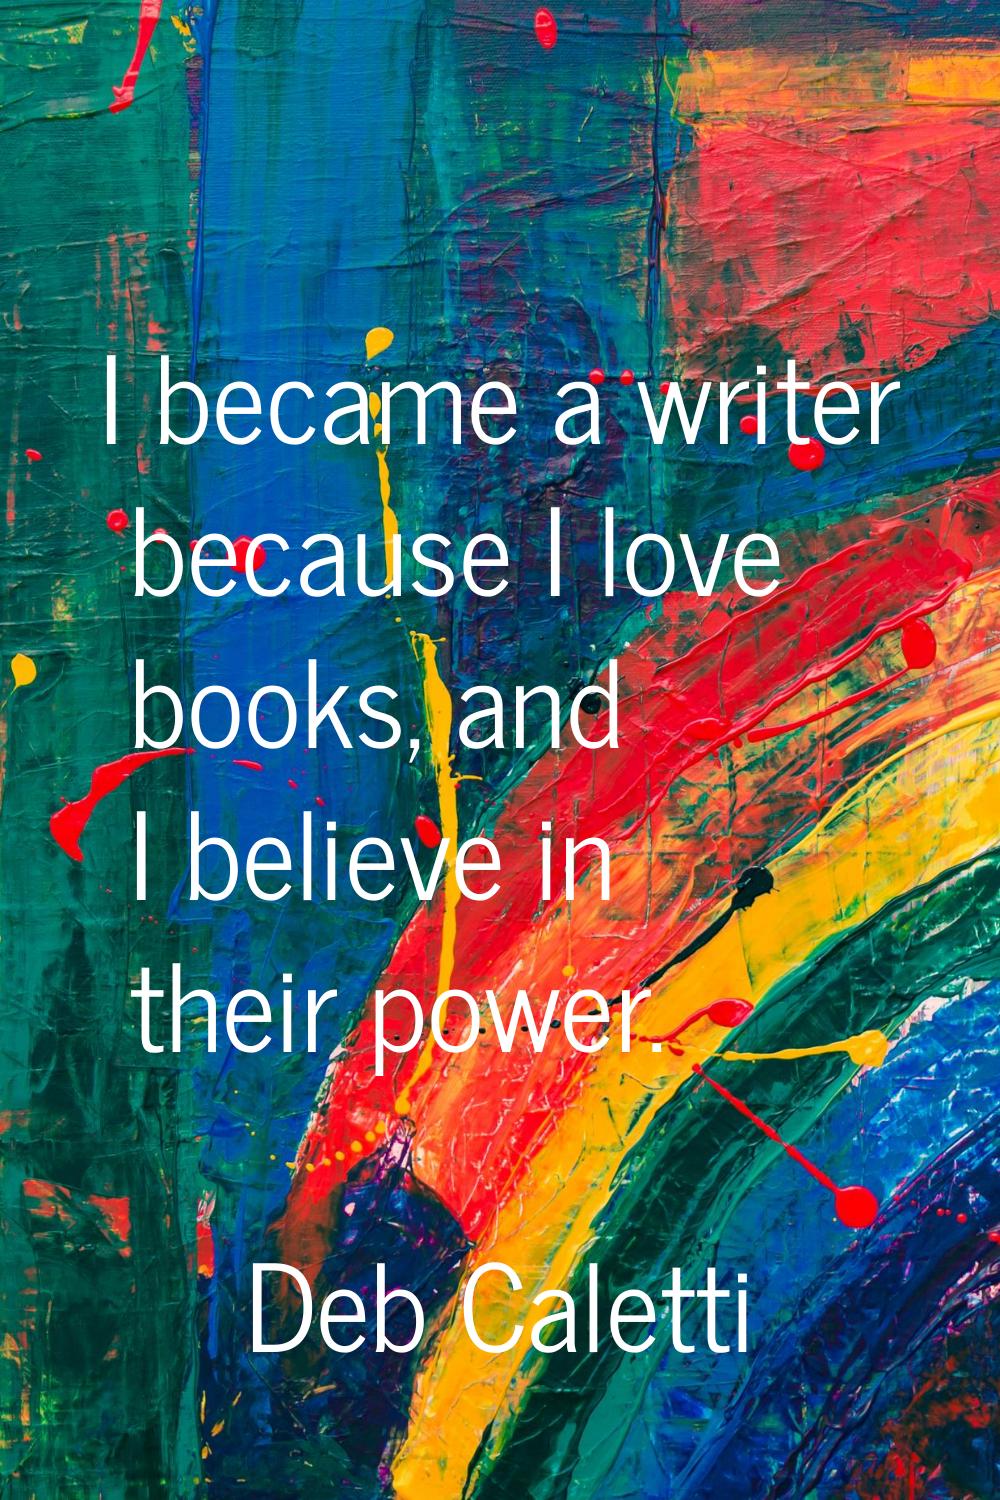 I became a writer because I love books, and I believe in their power.